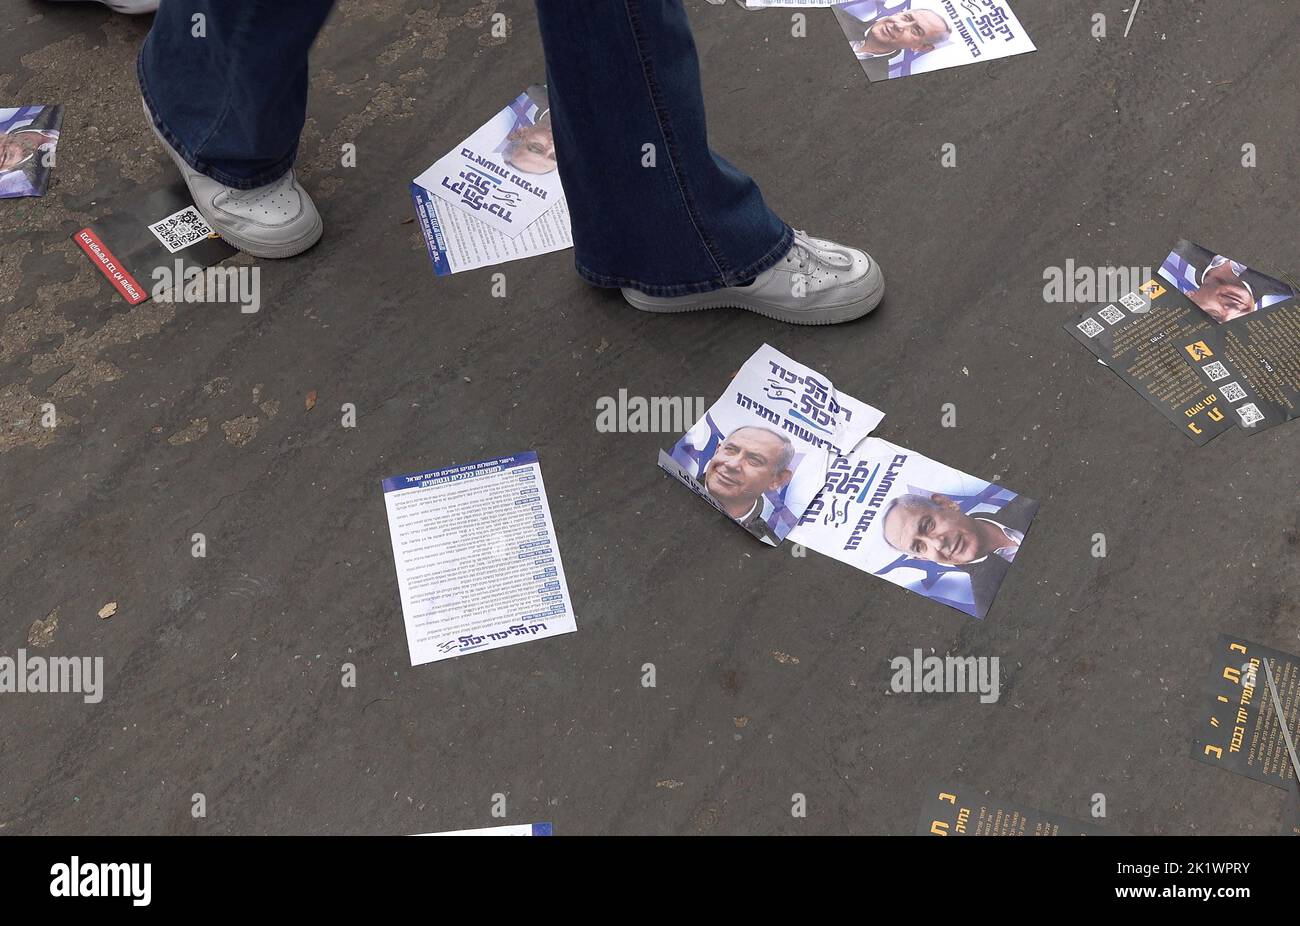 Israeli students walk over party leaflets as they gather for a mock parliamentary election at Bleich school on September 20, 2022 in Ramat Gan, Israel. Bleich High School holds a mock parliamentary election and panel ahead of every election, inviting members of all parties to participate. The high school has earned a reputation for accurately predicting the results of previous Knesset elections. Stock Photo